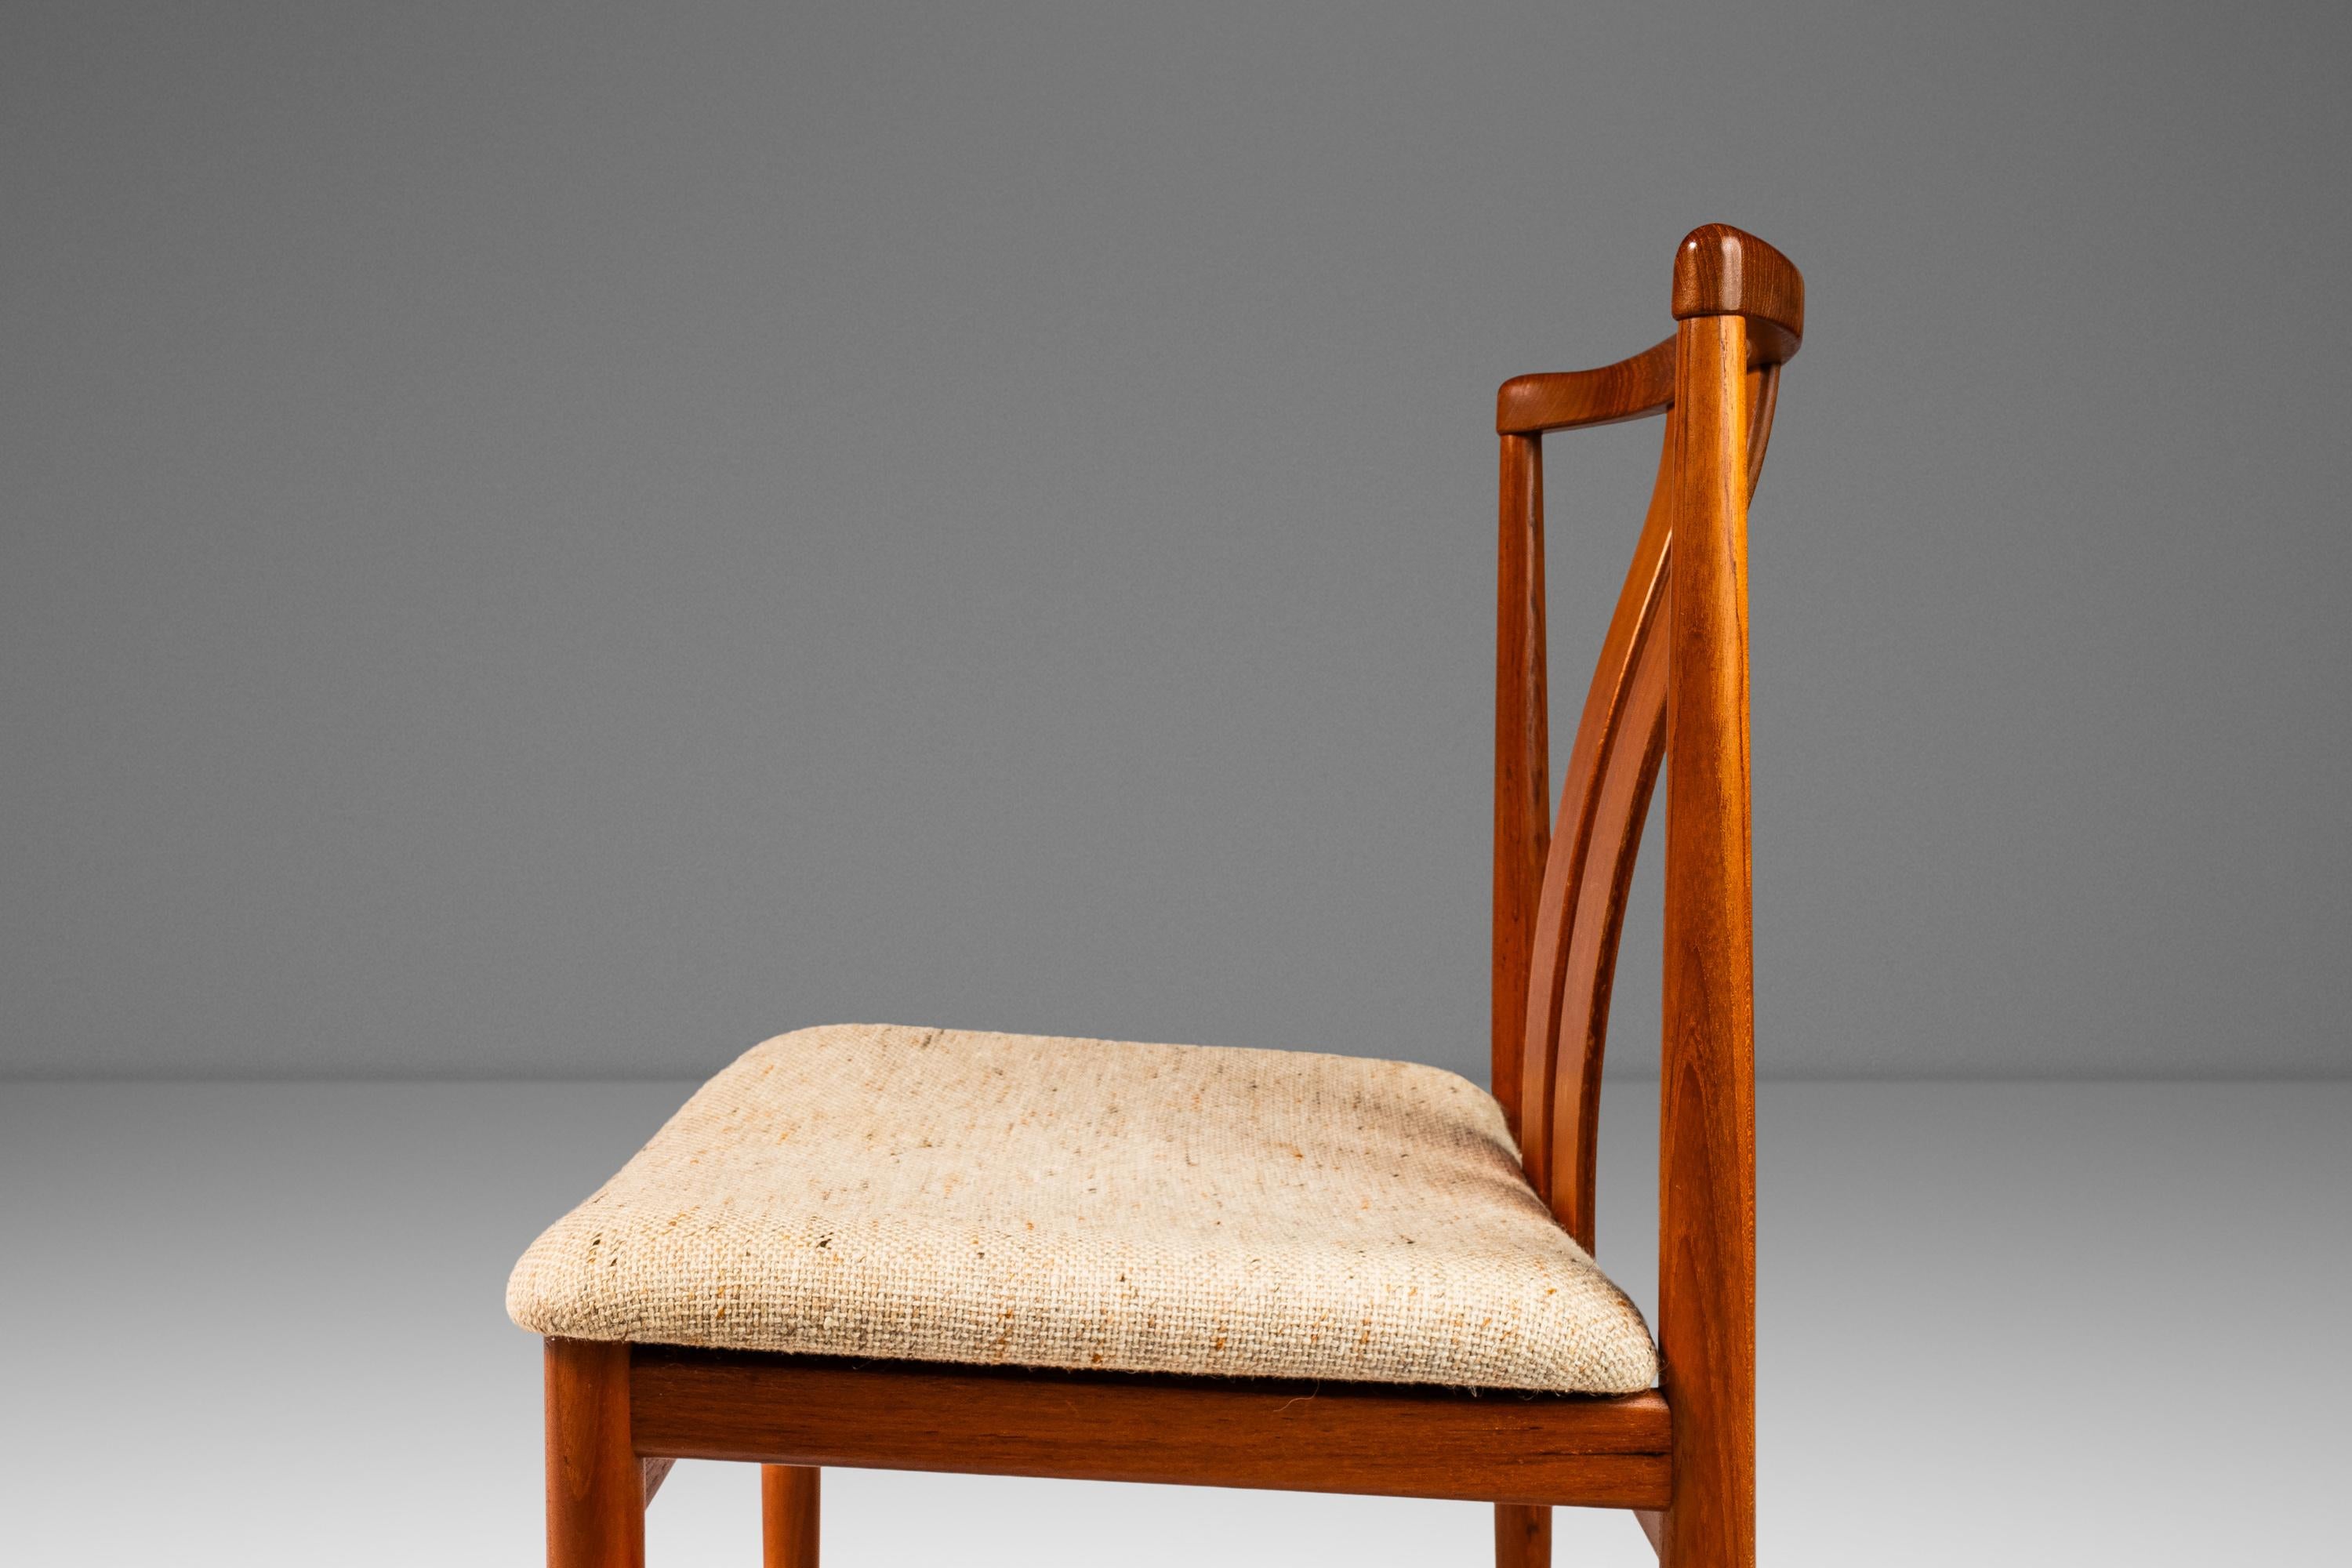 Set of 4 Dining Chairs, Teak & Oatmeal Knit Fabric by Vamdrup Stolefabrik, 1960s For Sale 6